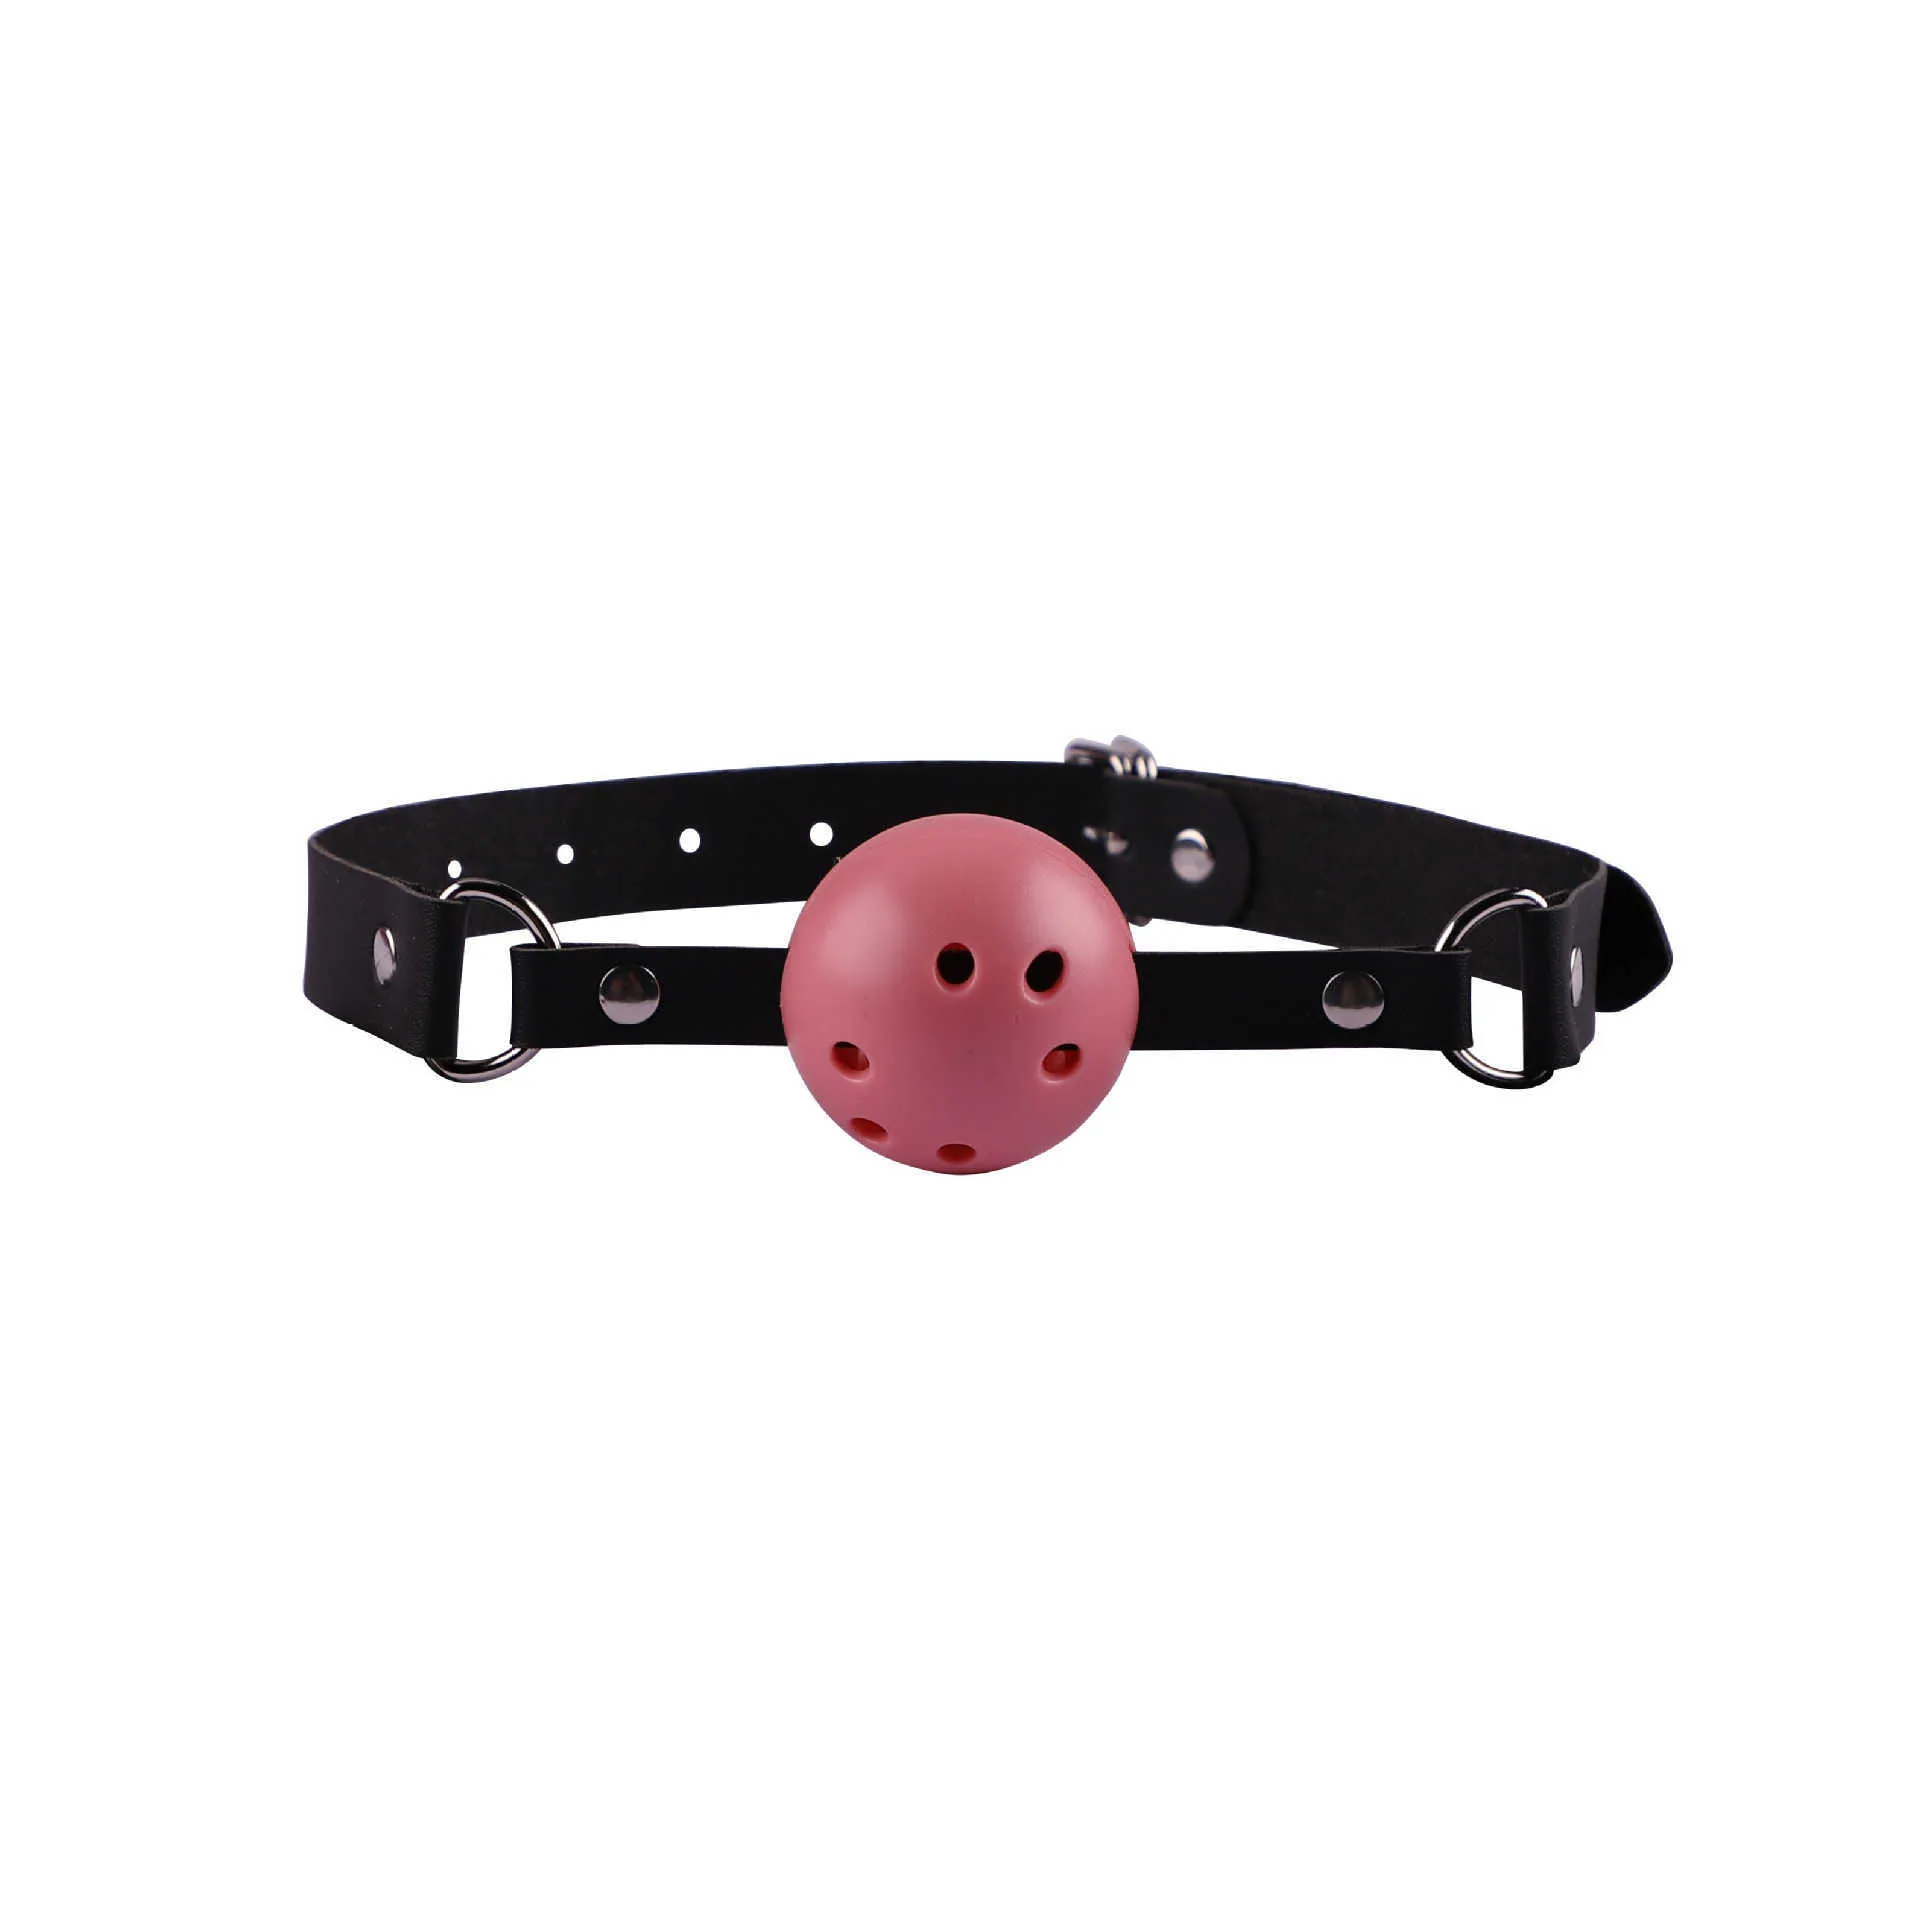 Adult Games Ball BDSM Bondage Restraints Open Mouth Breathable Sexy Ball Harness Strap Gag Sex Tools For Couples P0816